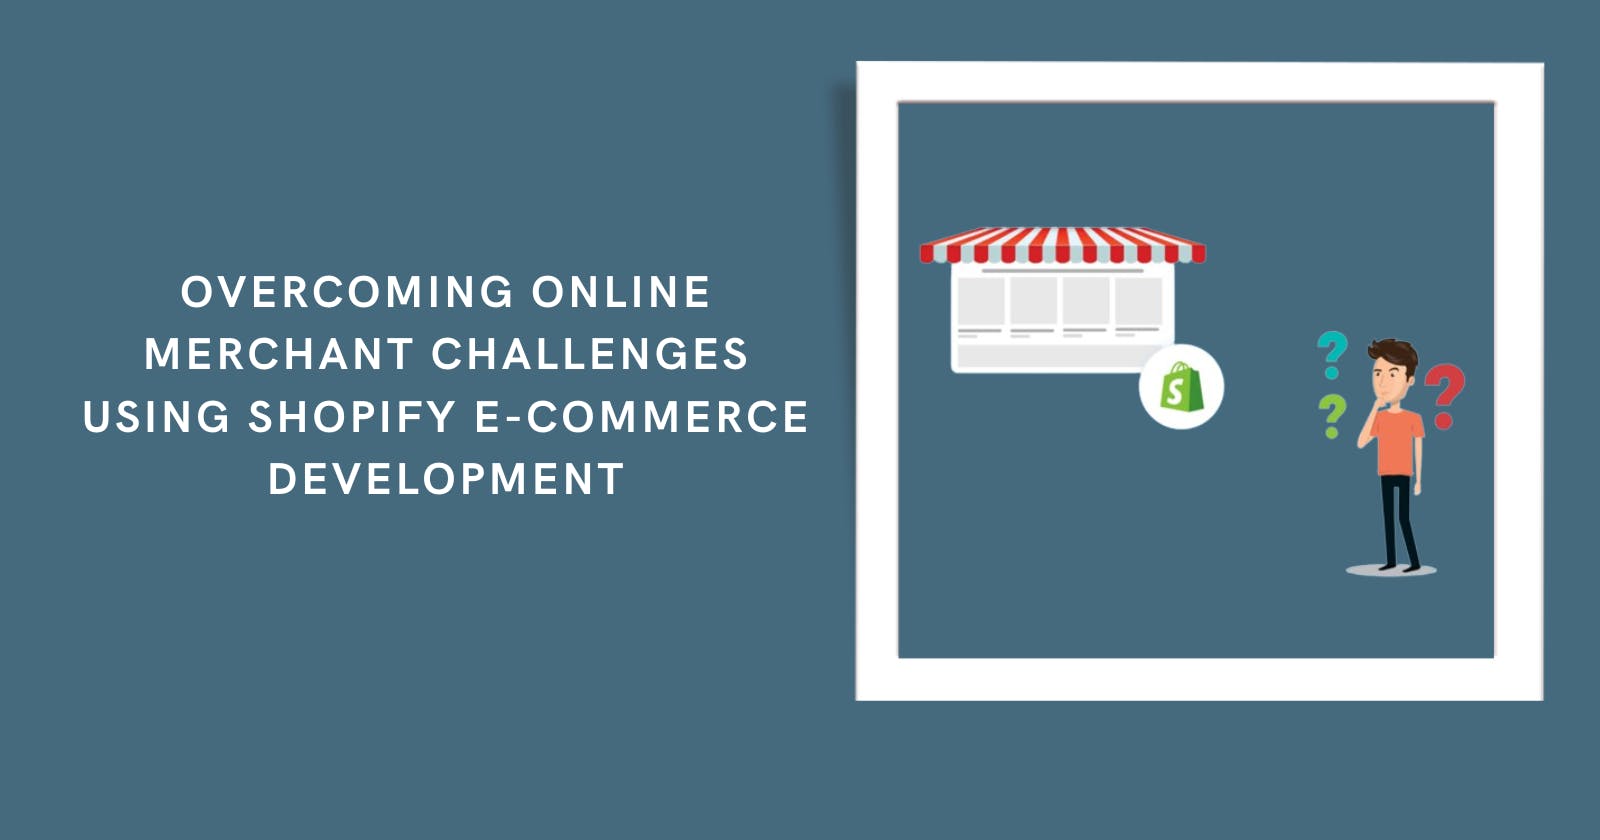 Using Shopify Store Development Services To Overcome Online Merchant Challenges